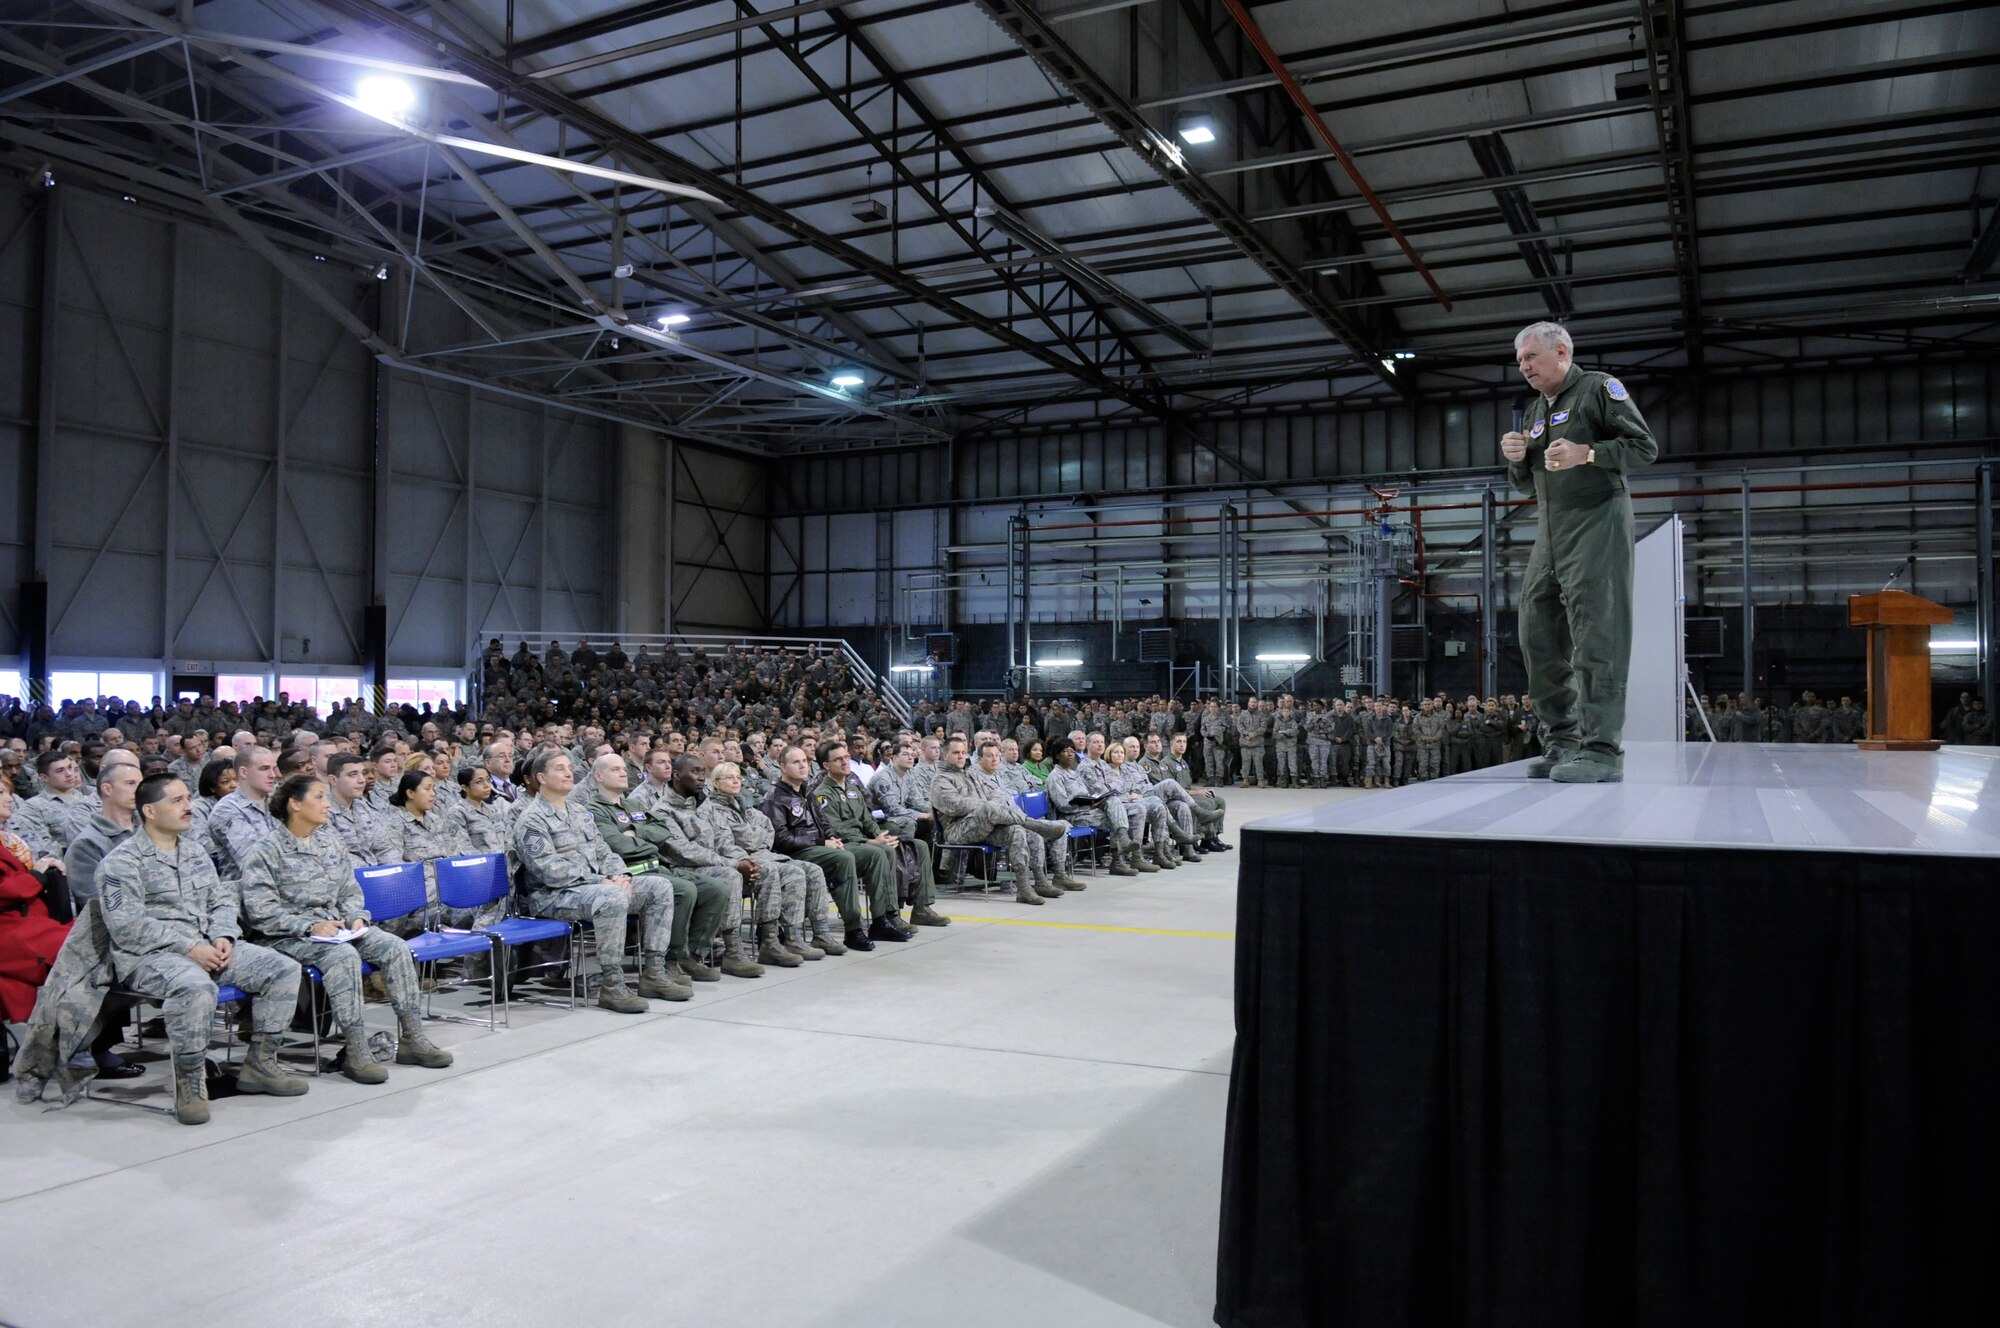 Gen. Roger A. Brady, U.S. Air Forces in Europe commander, addresses members of the 86th Airlift Wing, Ramstein Air Base Germany, during a wing-wide call, March 2. The general has been in command of USAFE since January of 2008. Though a frequent customer of many of the services the wing provides due to his residency here, the general's visit to the wing this time was special as it focused on recognizing various wing Airmen and relaying key messages in regards to the future of the force.  (U.S. Air Force Photo by: Airman 1st Class Brittany Perry)